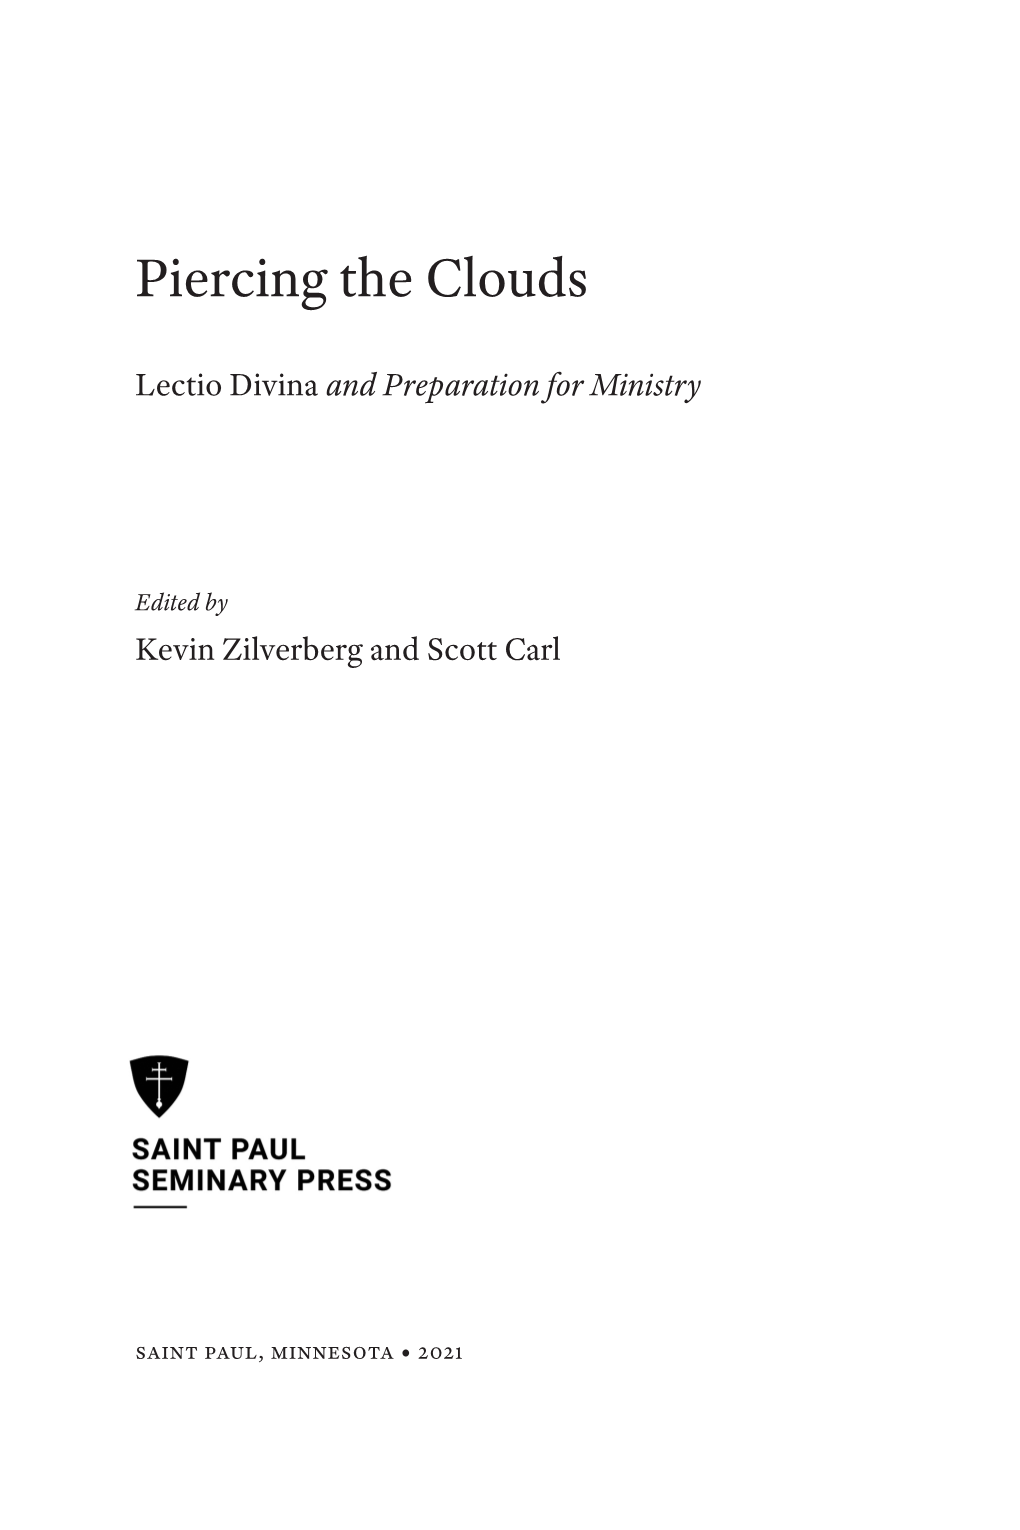 Piercing the Clouds